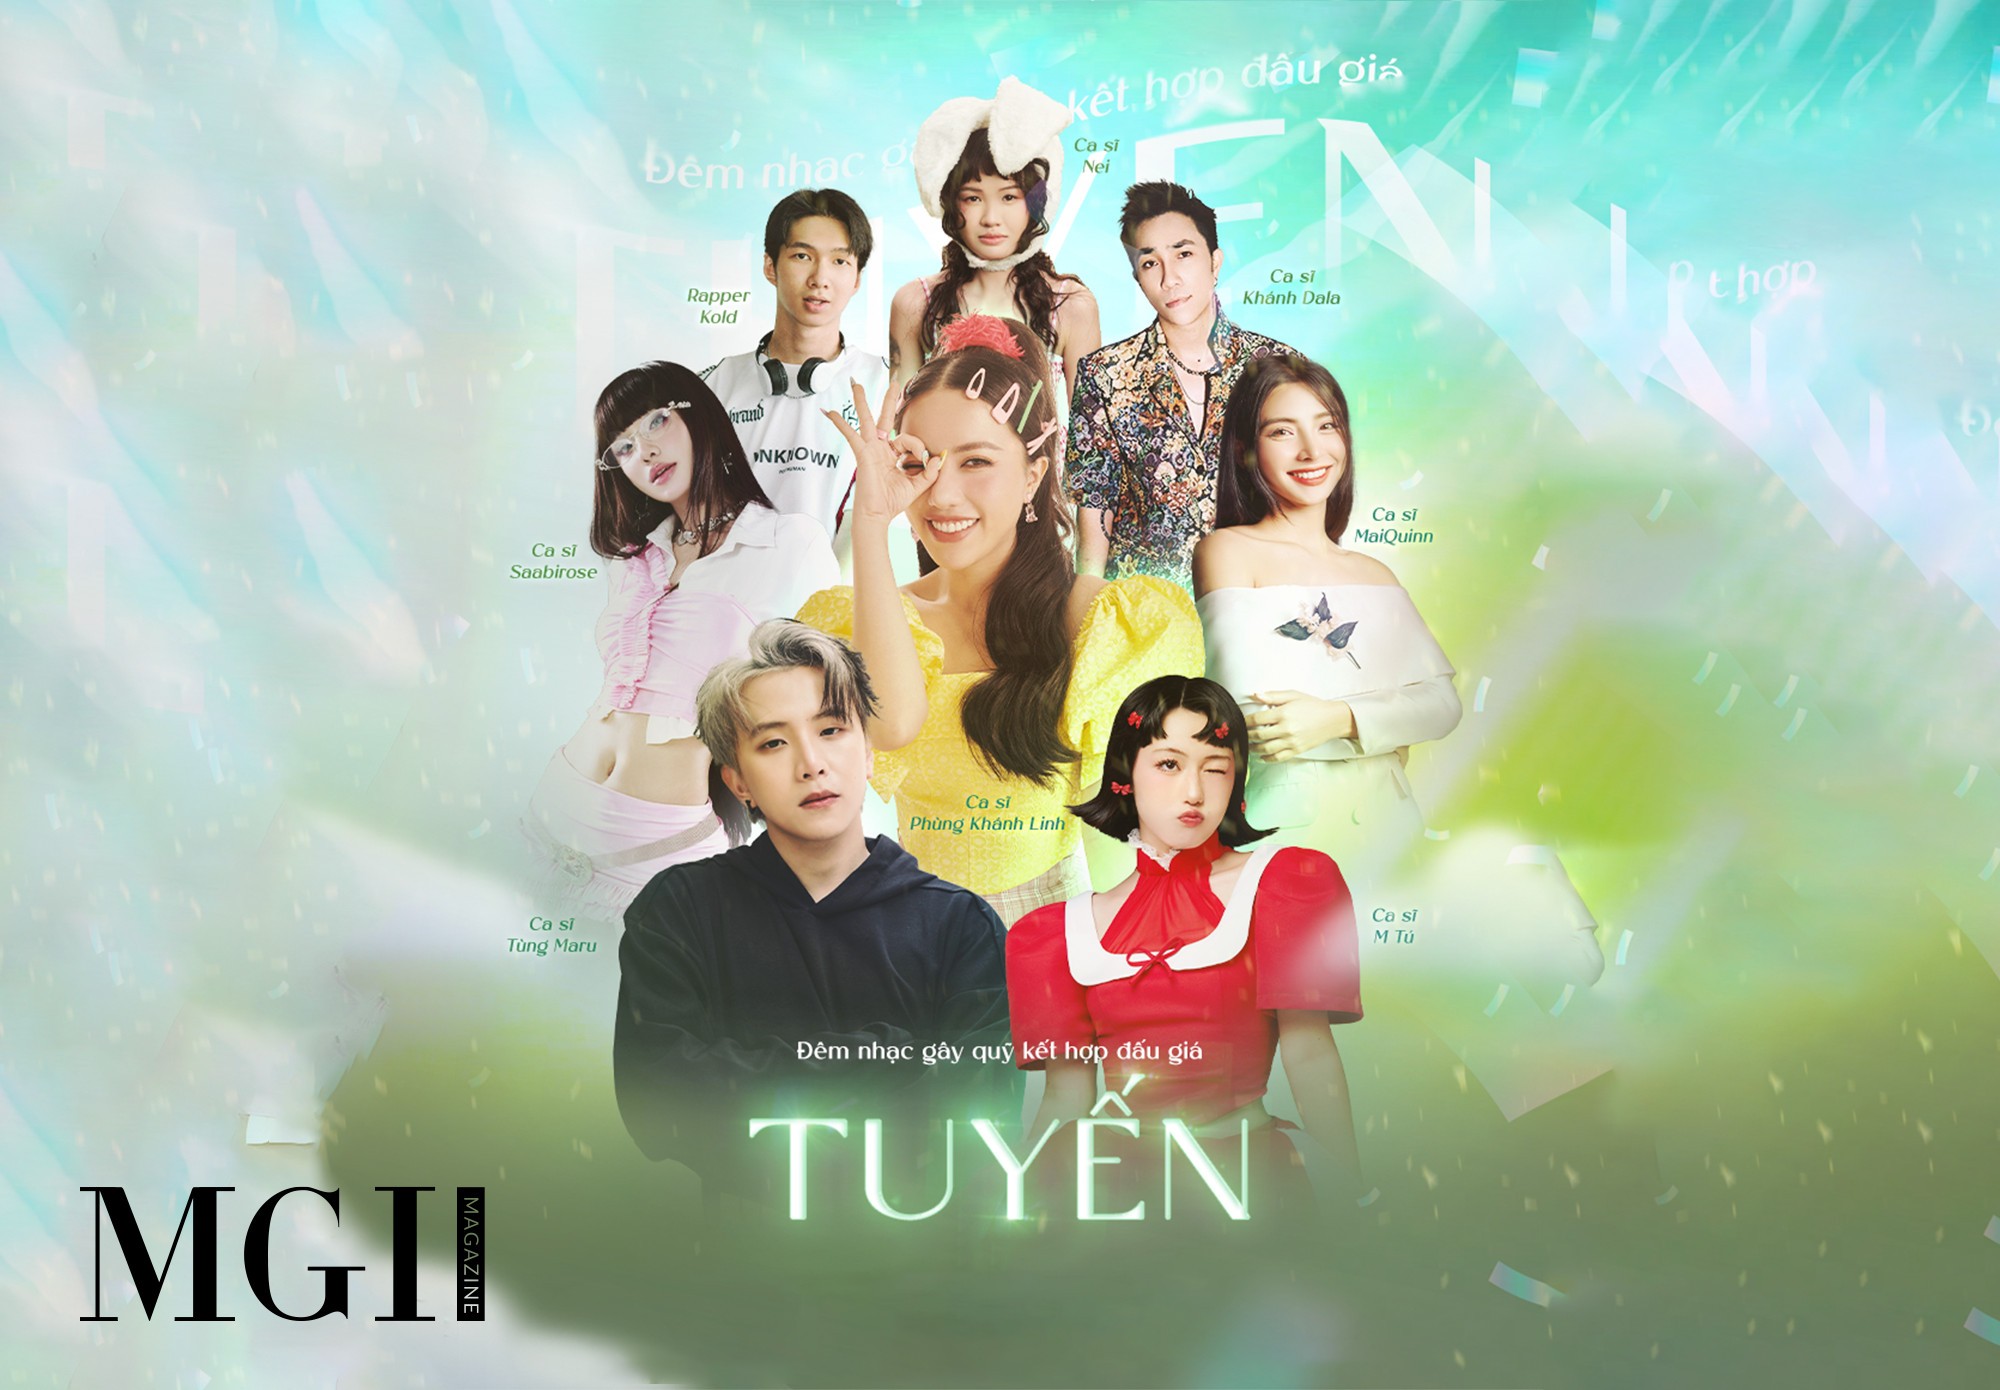 “TUYEN”: FUNDRAISING AND AUCTIONING MUSIC SHOW TO SUPPORT SOS CHILDREN’S VILLAGE (GO VAP DISTRICT)